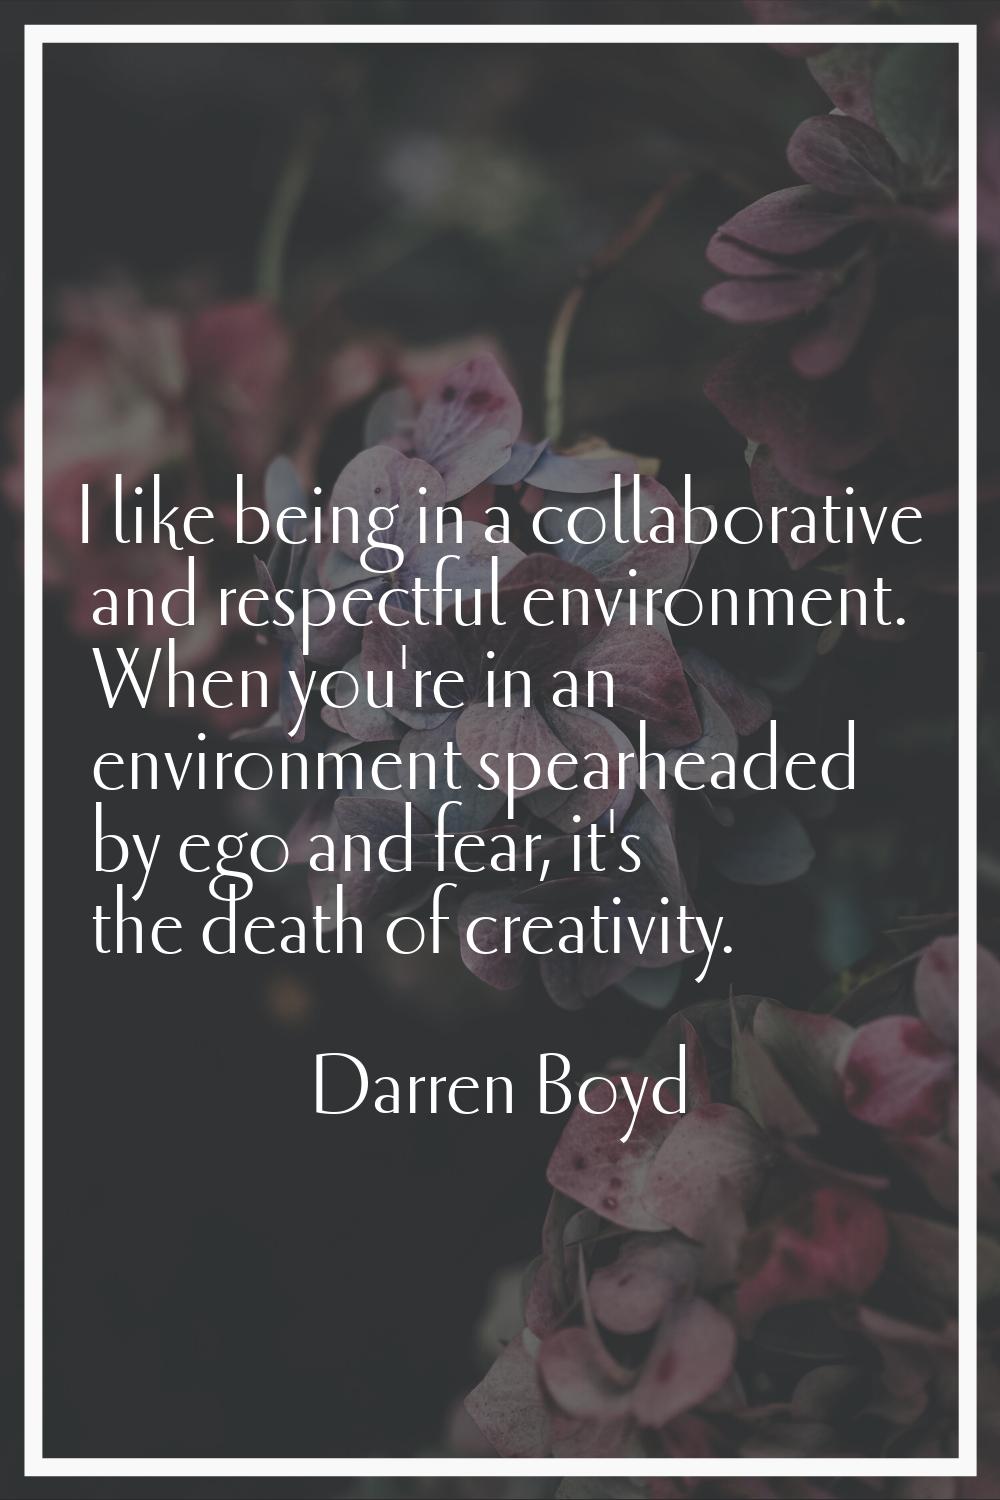 I like being in a collaborative and respectful environment. When you're in an environment spearhead